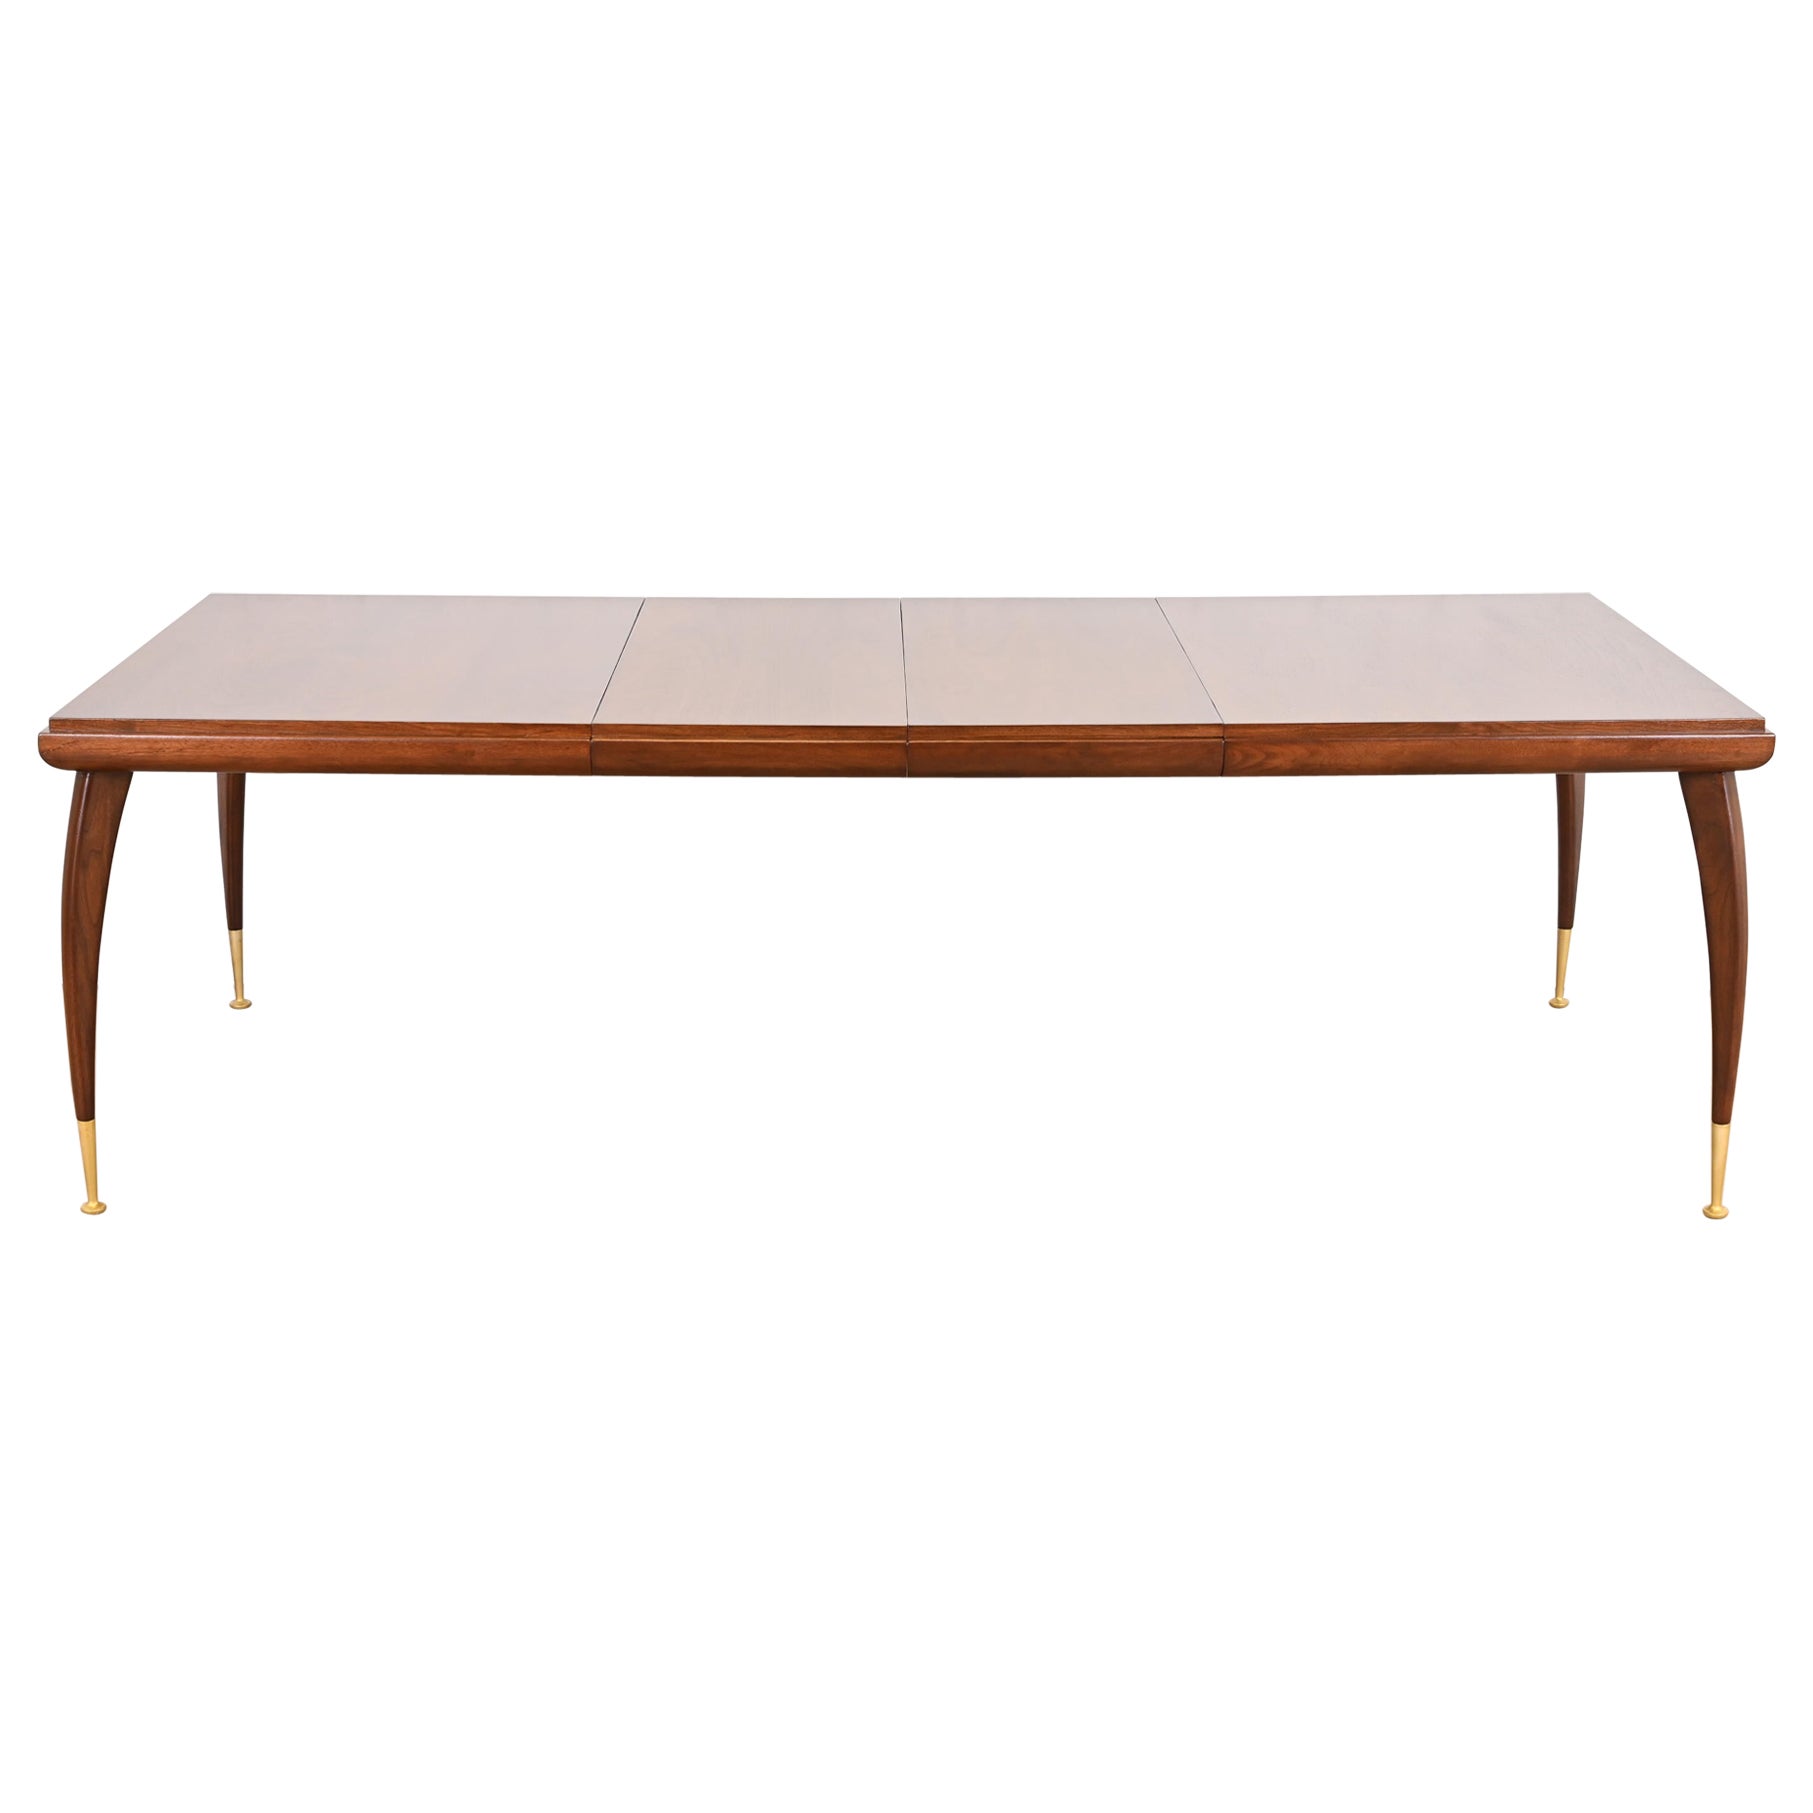 Gio Ponti Style Mid-Century Modern Walnut Extension Dining Table, Refinished